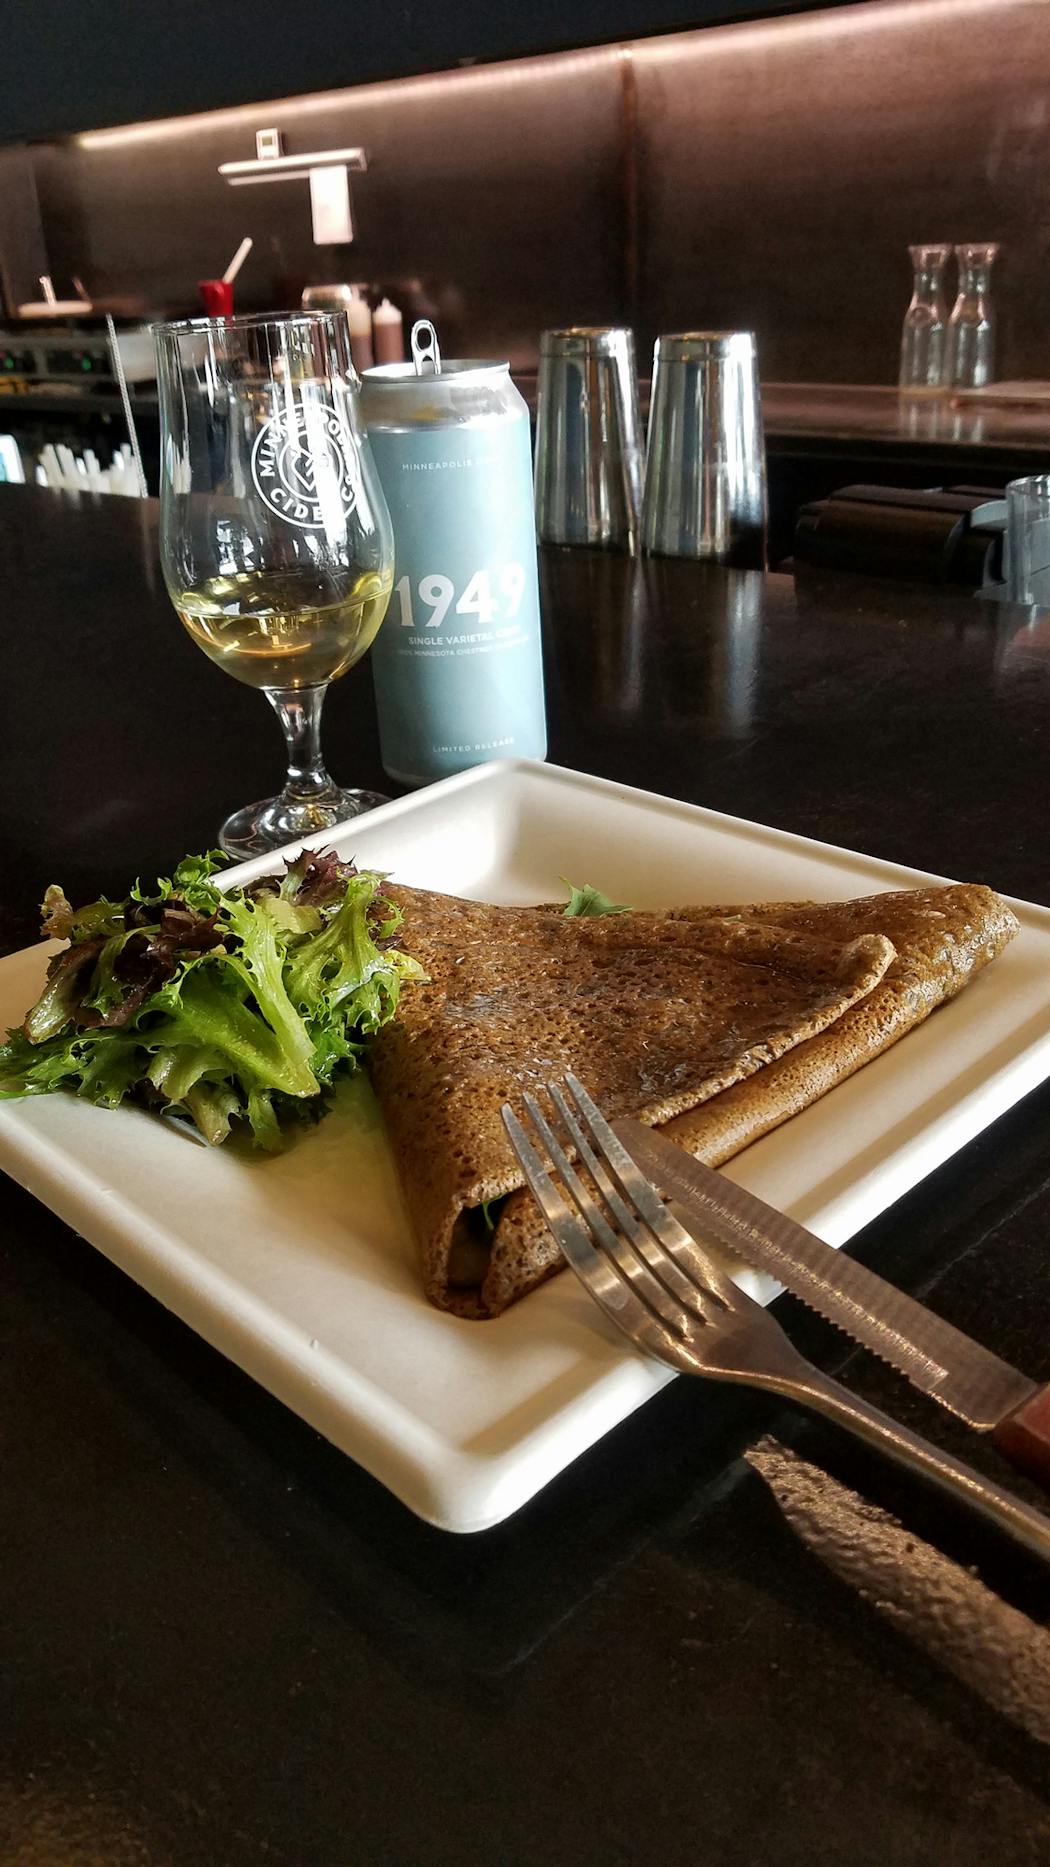 A brie galette — Brie, honey, bacon and arugula — and the 1949 single varietal chestnut crab cider at Minneapolis Cider Co. complement each other.